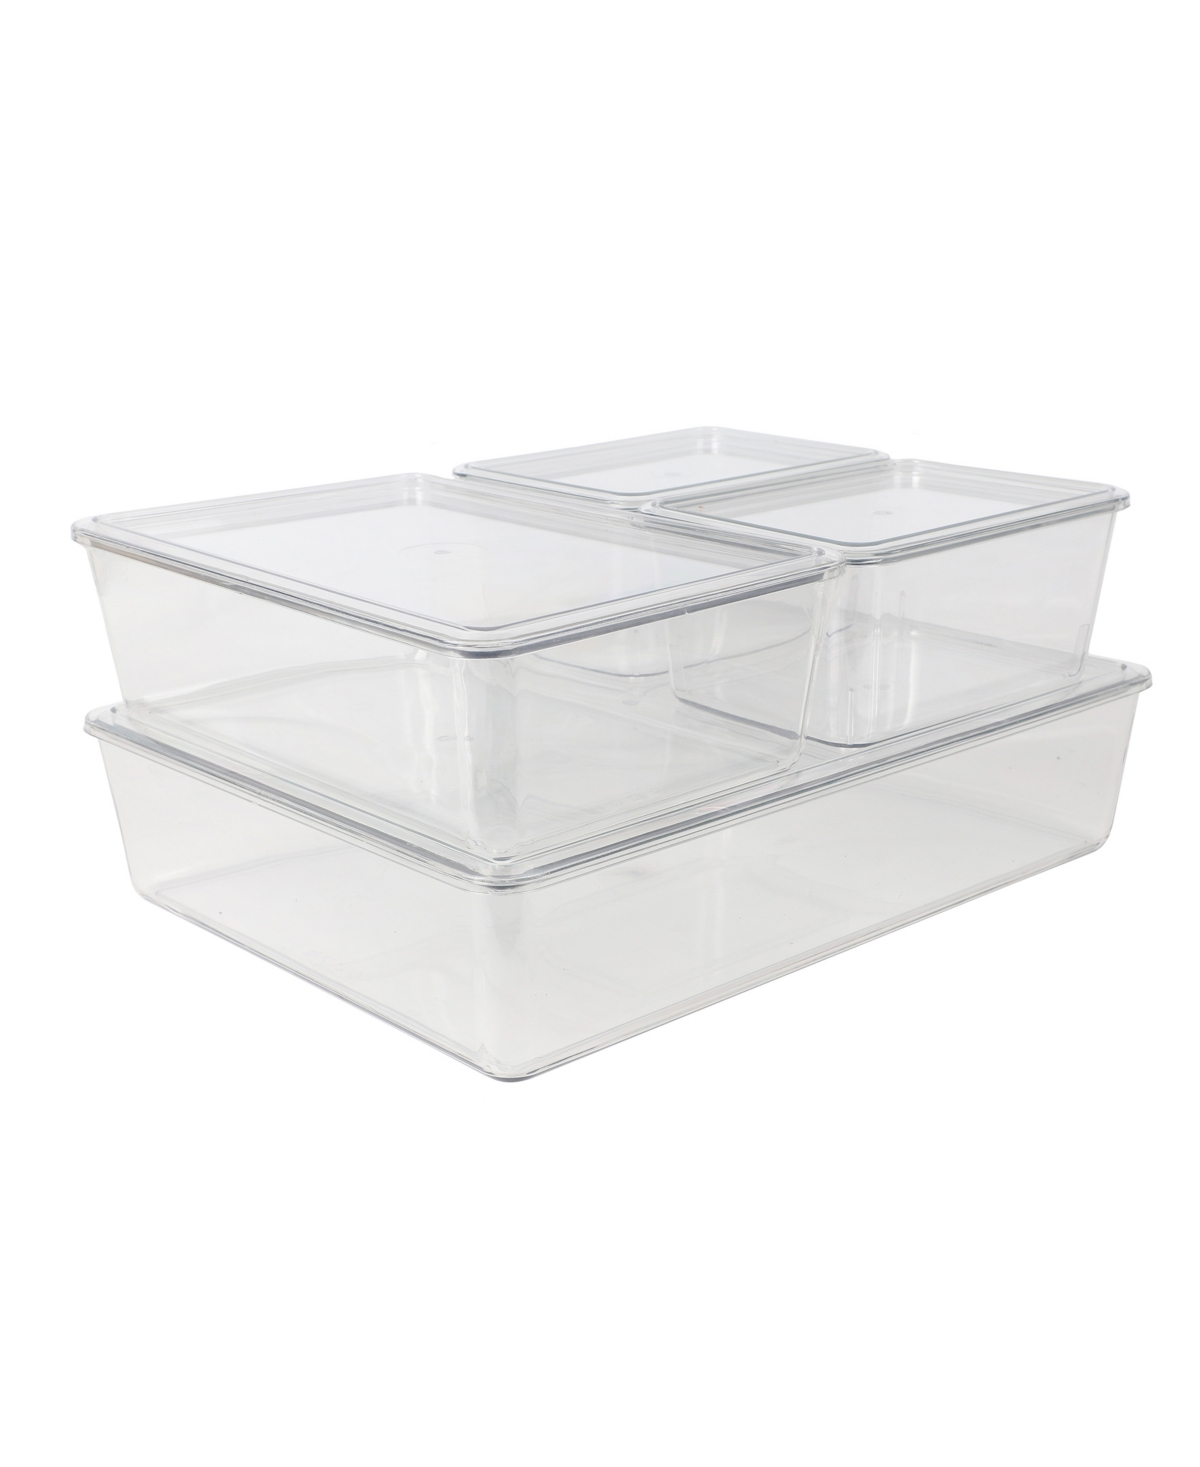 Brody Stackable Plastic Storage Box with Lids Office Desktop Organizers, Set of 4, 2 Small, 1 Medium, 1 Large - Clear